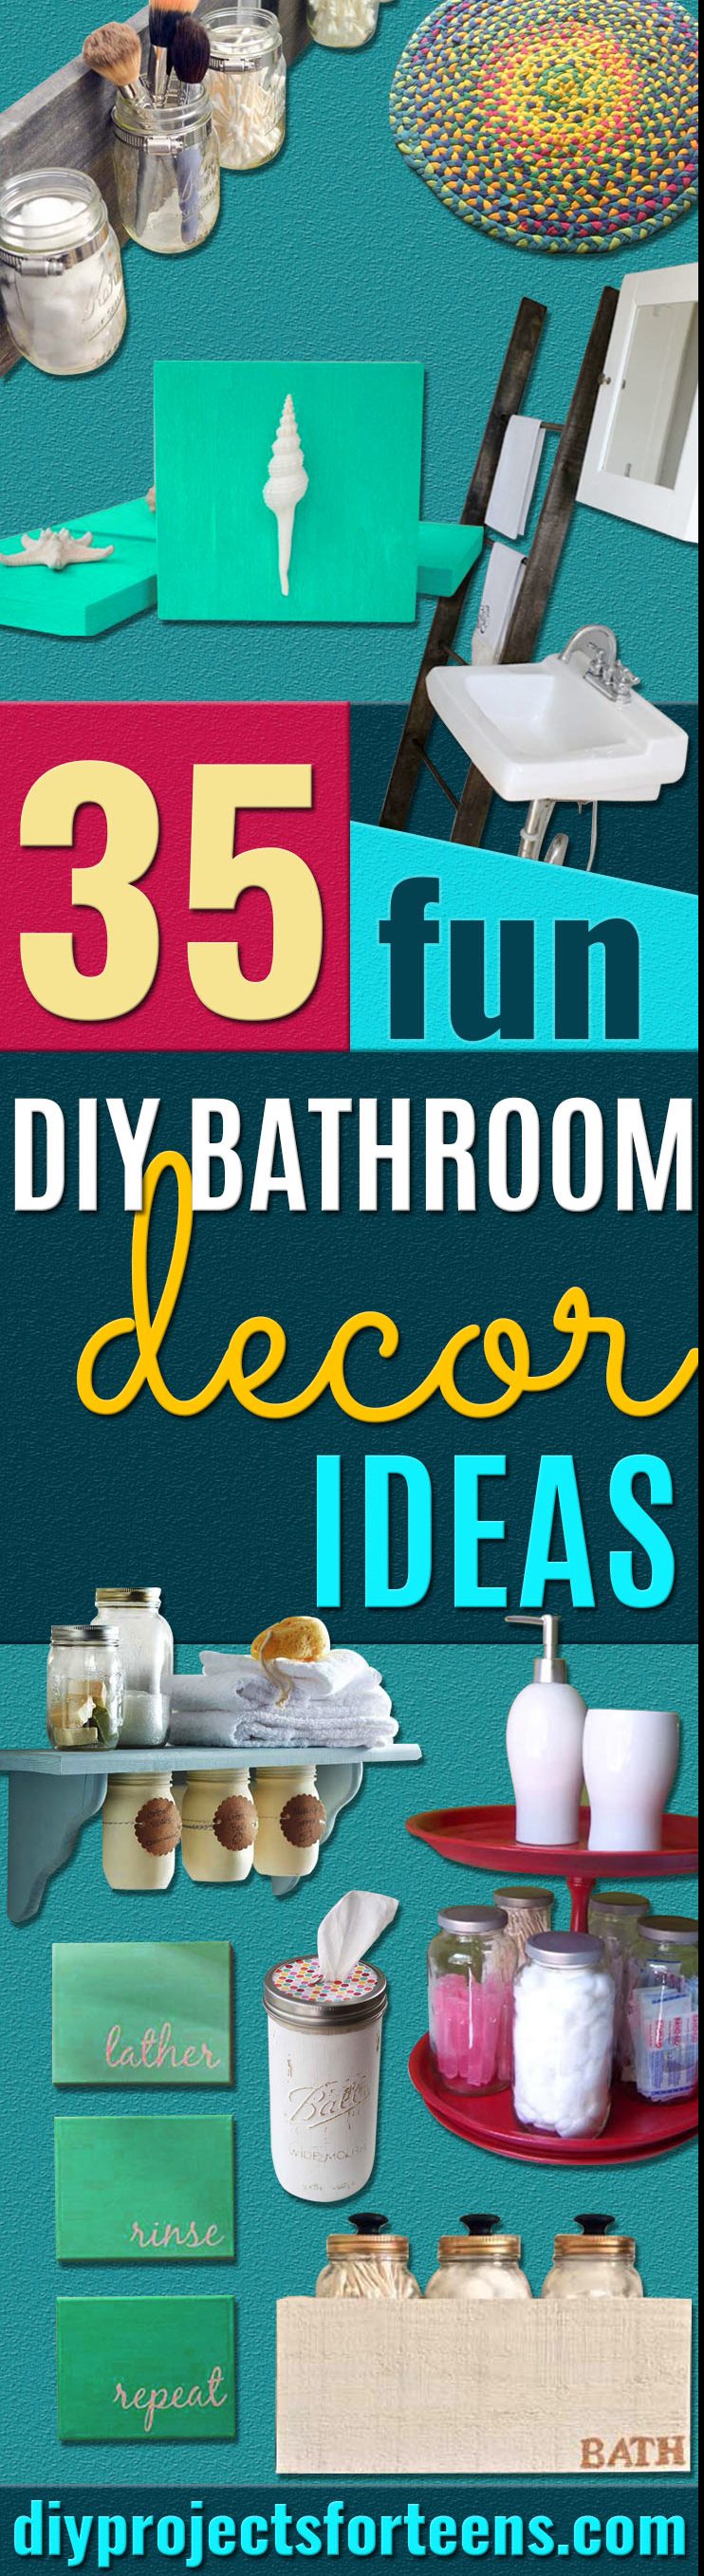 DIY Bathroom Decor Ideas for Teens - Best Creative, Cool Bath Decorations and Accessories for Teenagers - Easy, Cheap, Cute and Quick Craft Projects That Are Fun To Make. Easy to Follow Step by Step Tutorials